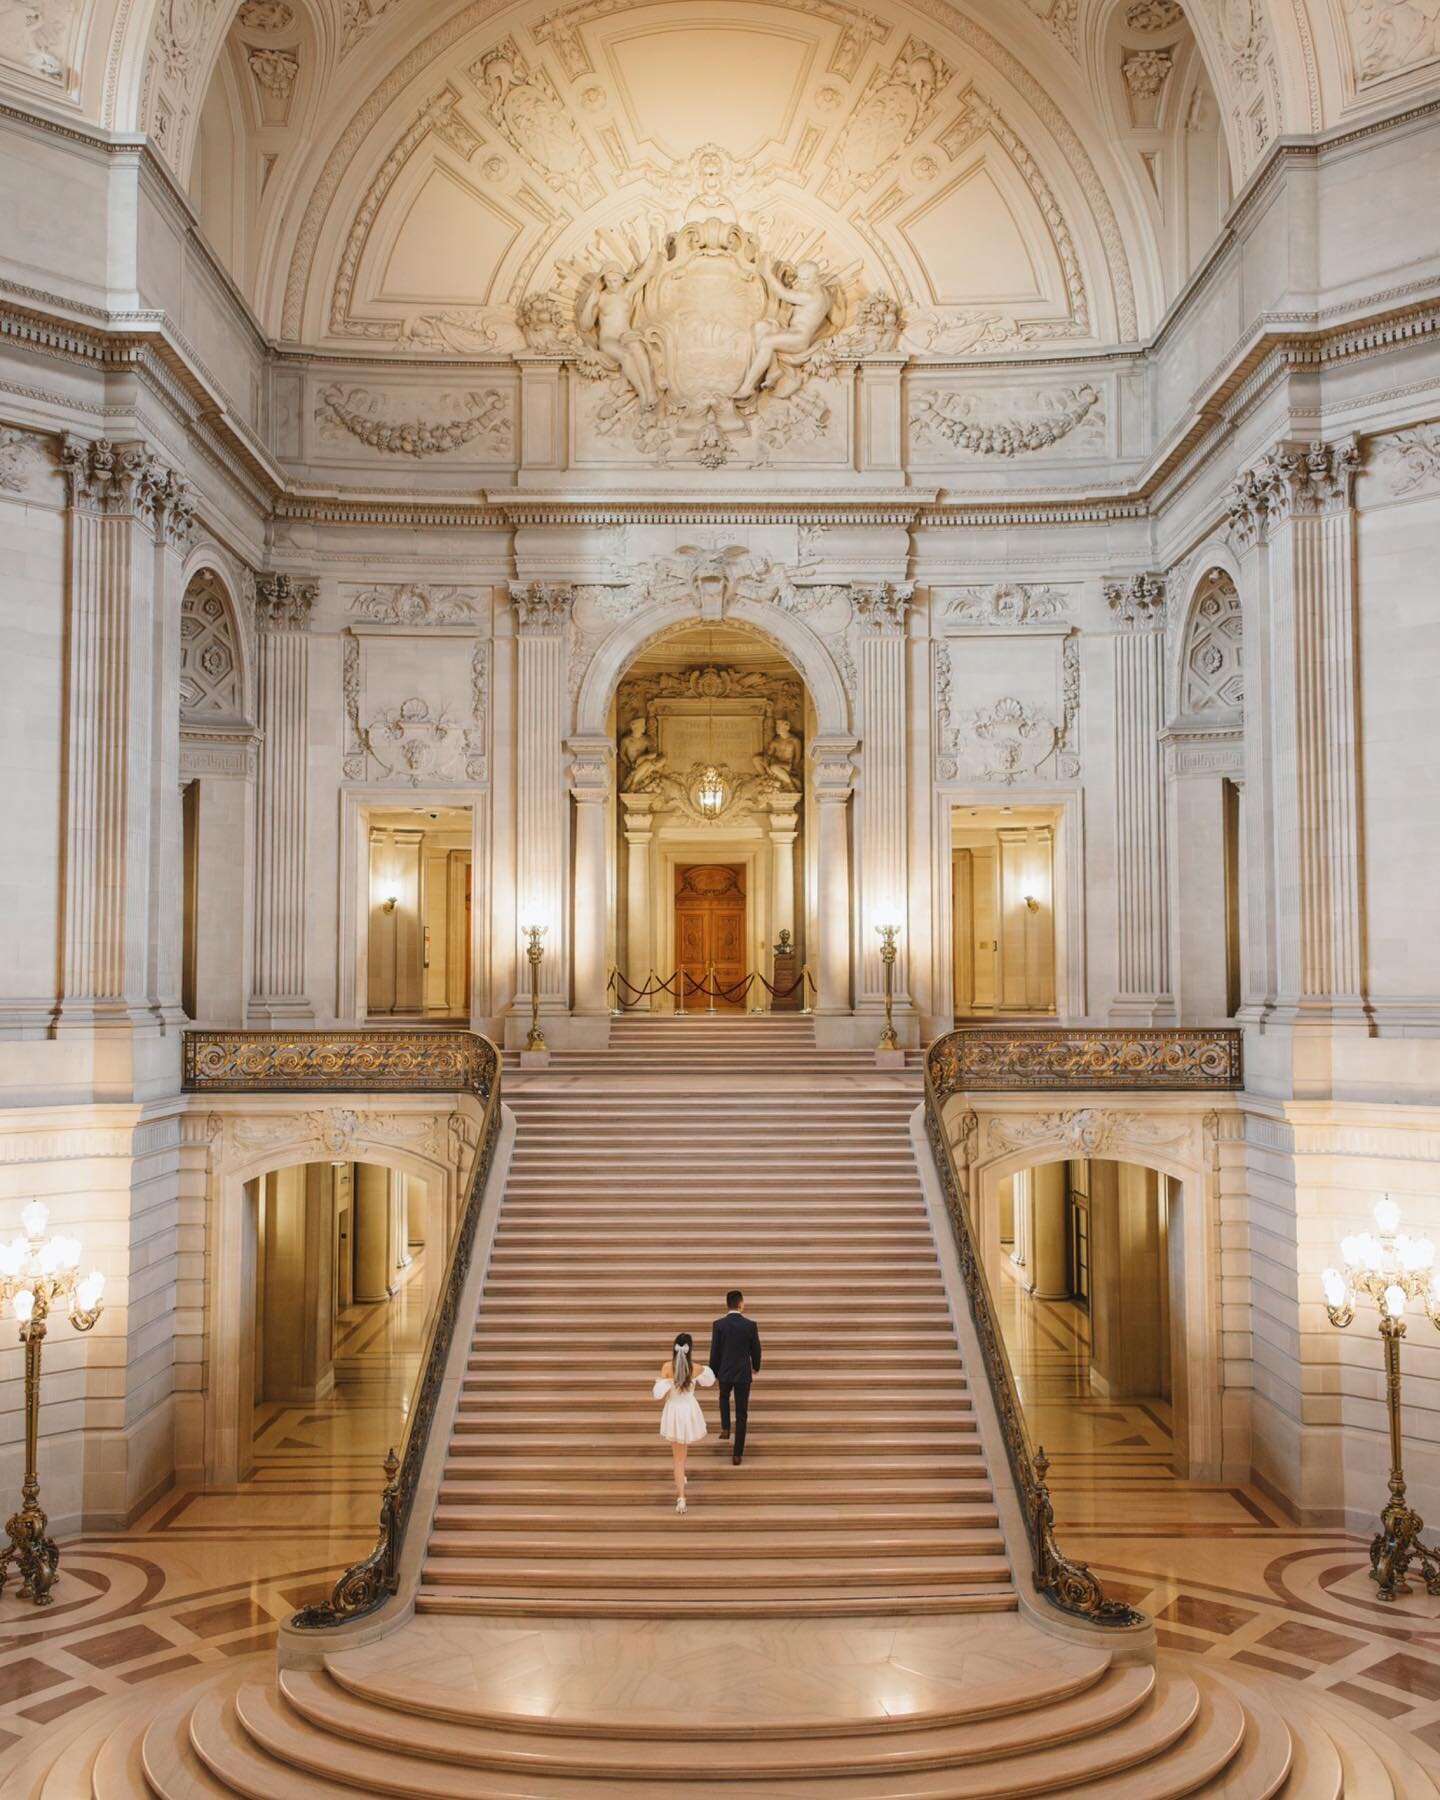 We got to experience SF City Hall for the first time last week and it was truly amazing. Thanks to Amanda and Isaiah for such a fun day exploring the city! We can&rsquo;t wait for their wedding next year! ✨
 
 
 
 
 

#californiaweddingphotographer #